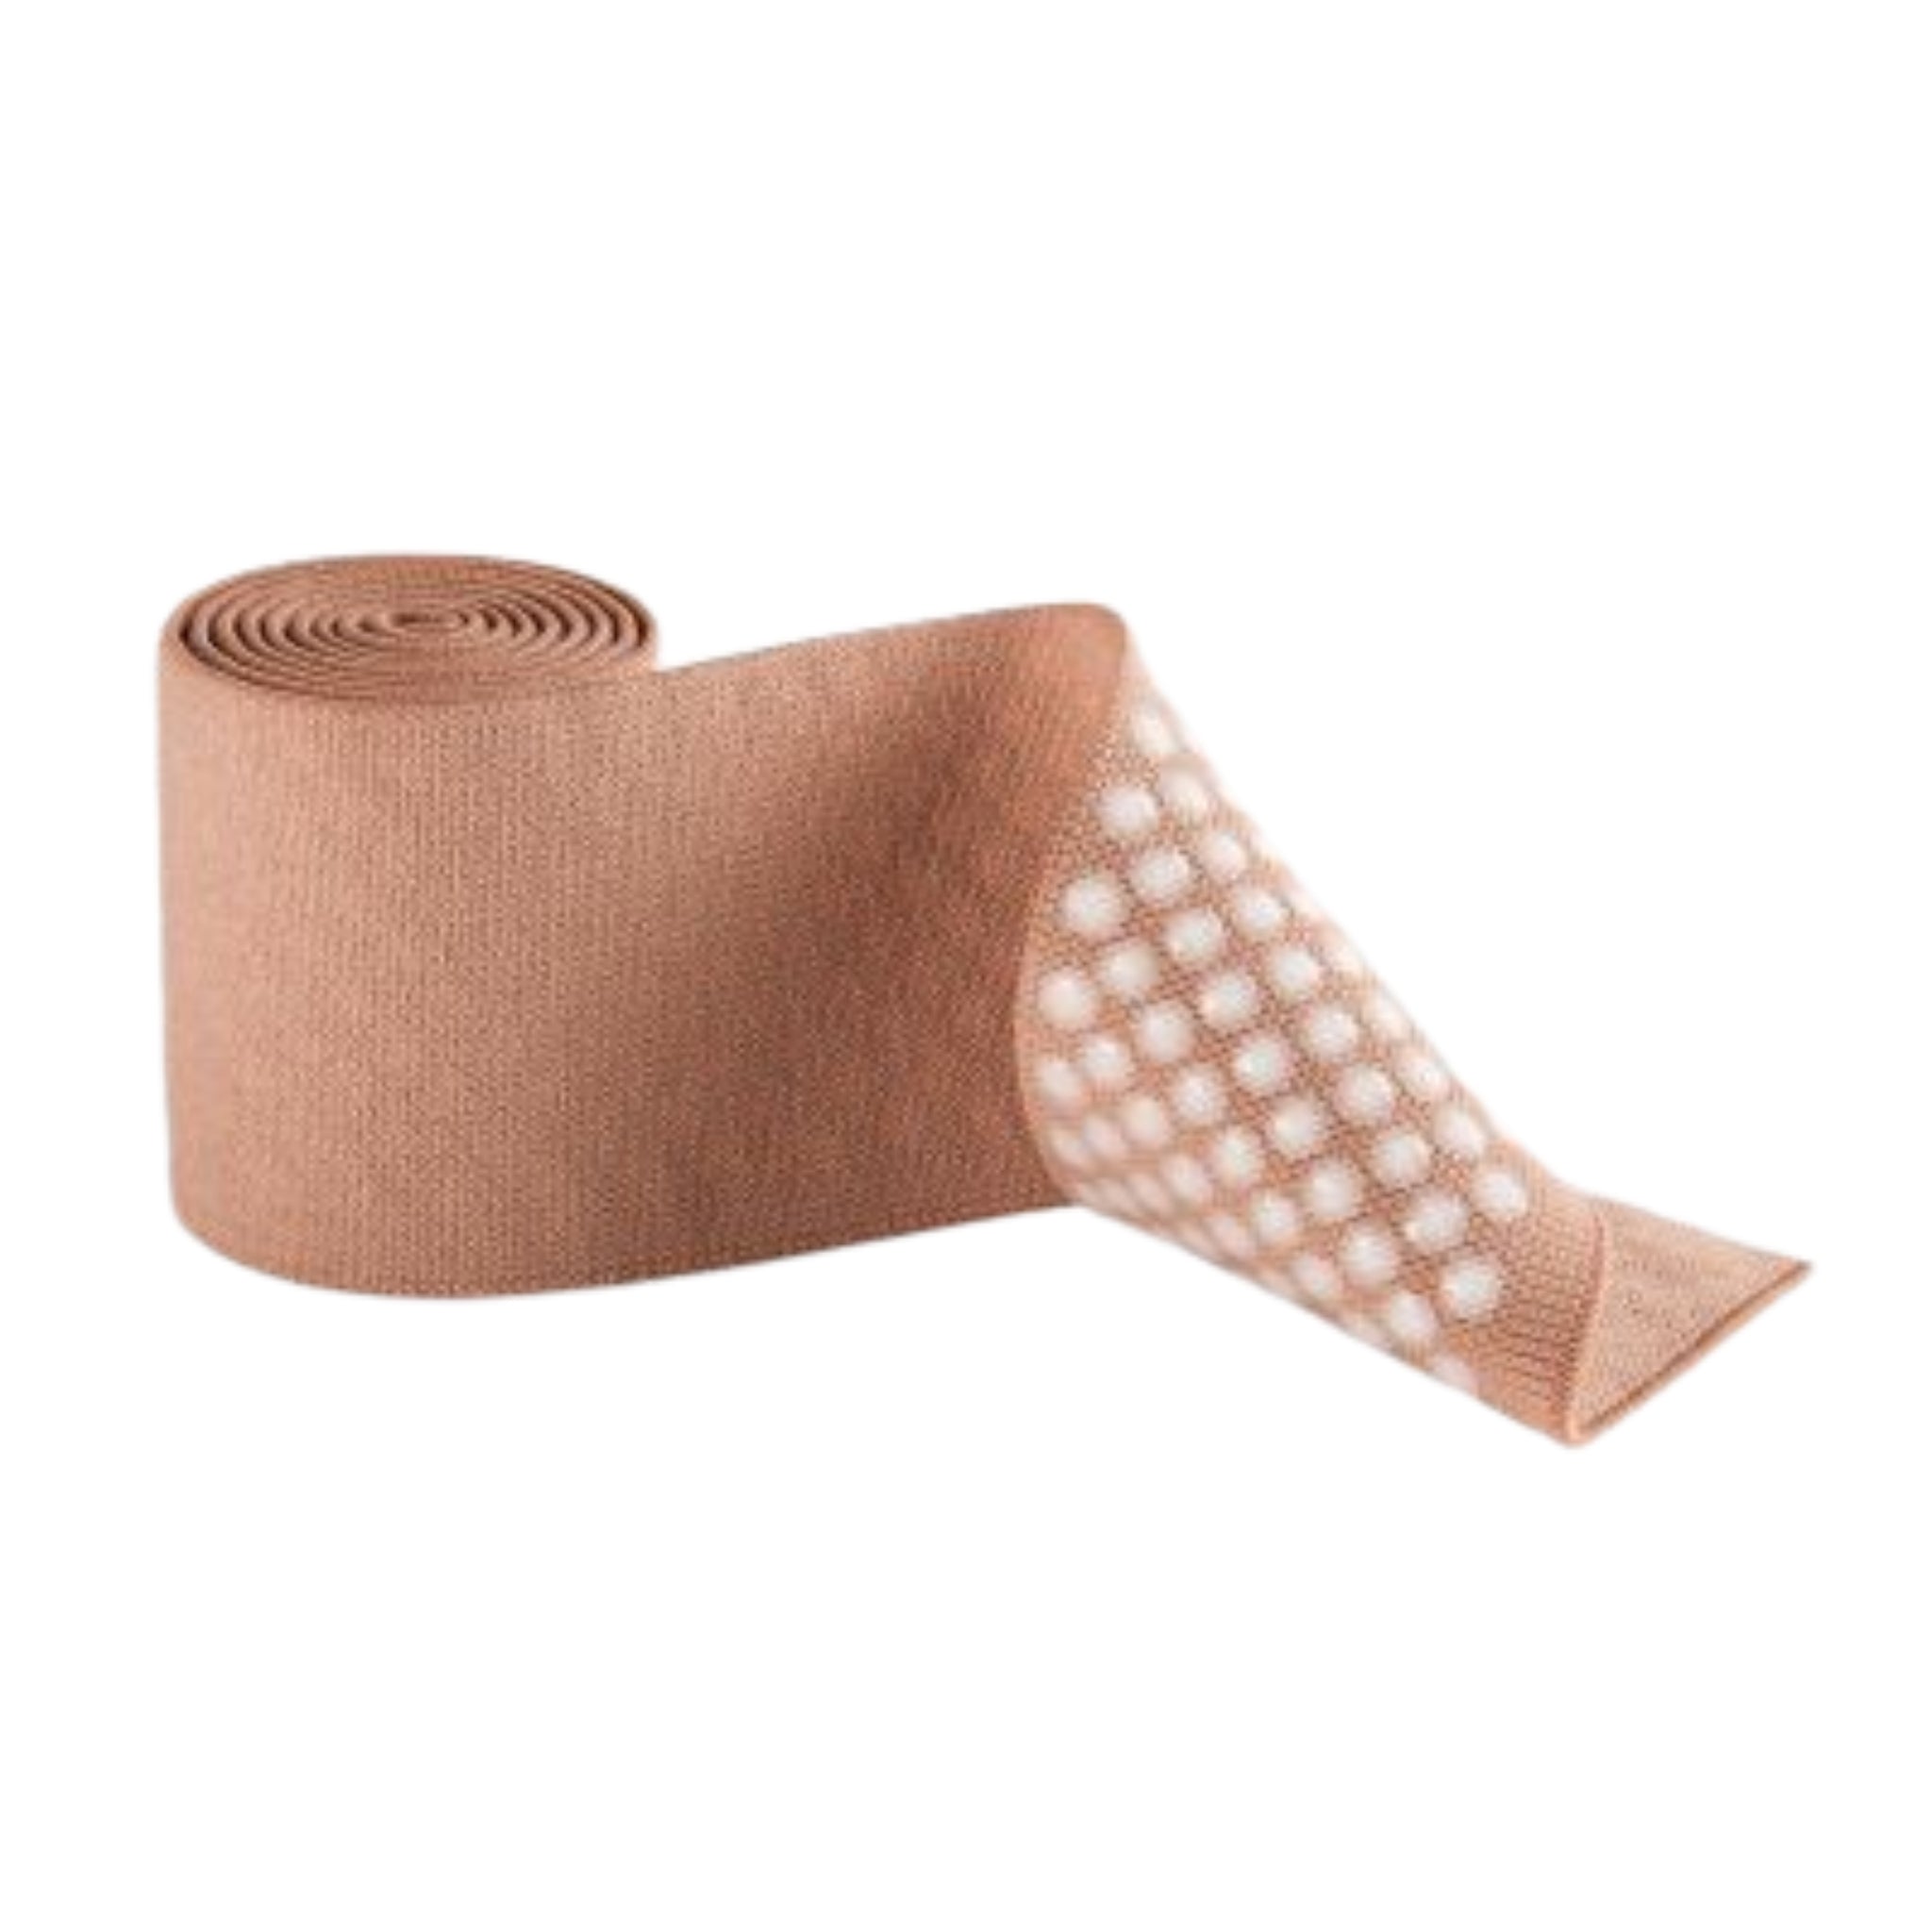 Compression Stockings | Below Knee | Closed Toe | Silicone Topband | Caramel | mediven plus®